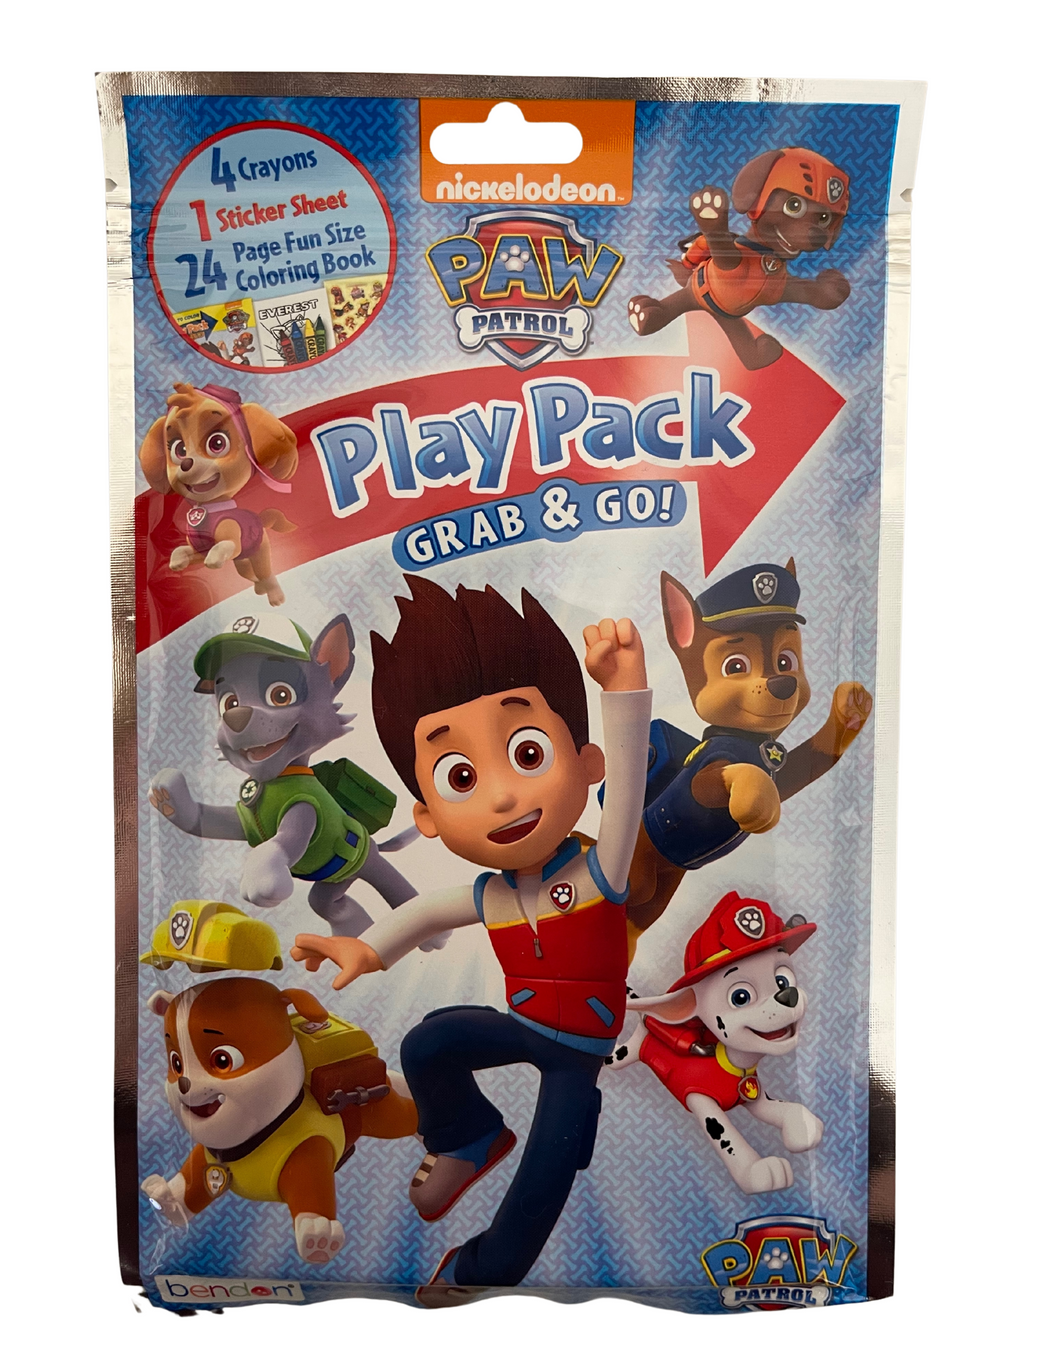 Paw Patrol Play Pack (Book, Crayons, & Stickers!)